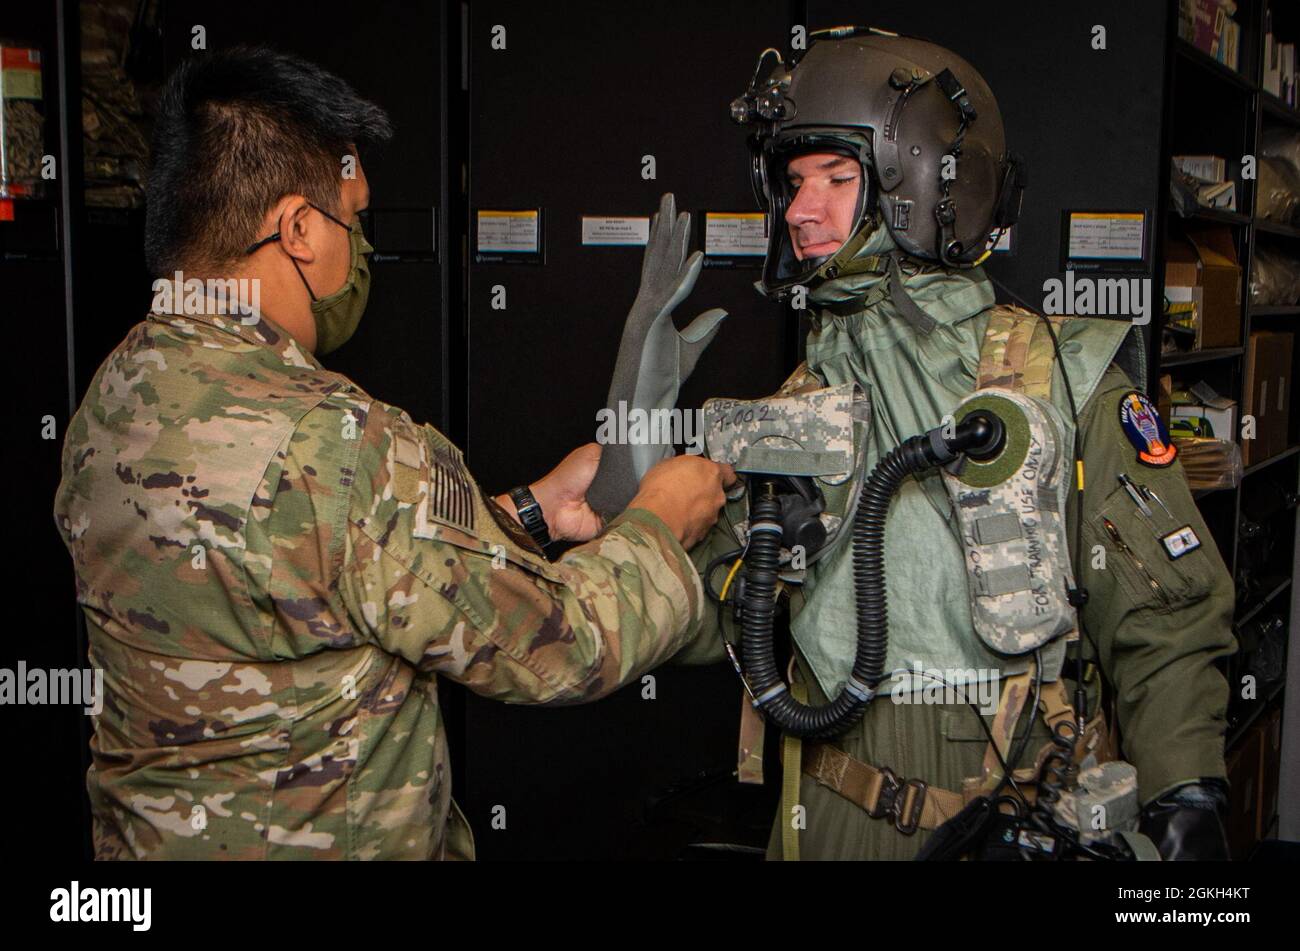 Maj. Daniel Morrissey, 88th Test and Evaluations Squadron (TES) assistant director of operations, is fitted with Chemical, Biological, Radiological, and Nuclear (CBRN) flight gear by Tech Sgt. Michael Engen, 88th TES aircrew flight equipment technician, before a development test at Nellis Air Force Base, Nevada, April 20, 2021. CBRN equipment provide Chemical, Biological, Radiological, and Nuclear protection to air crews in a toxic environment. Stock Photo